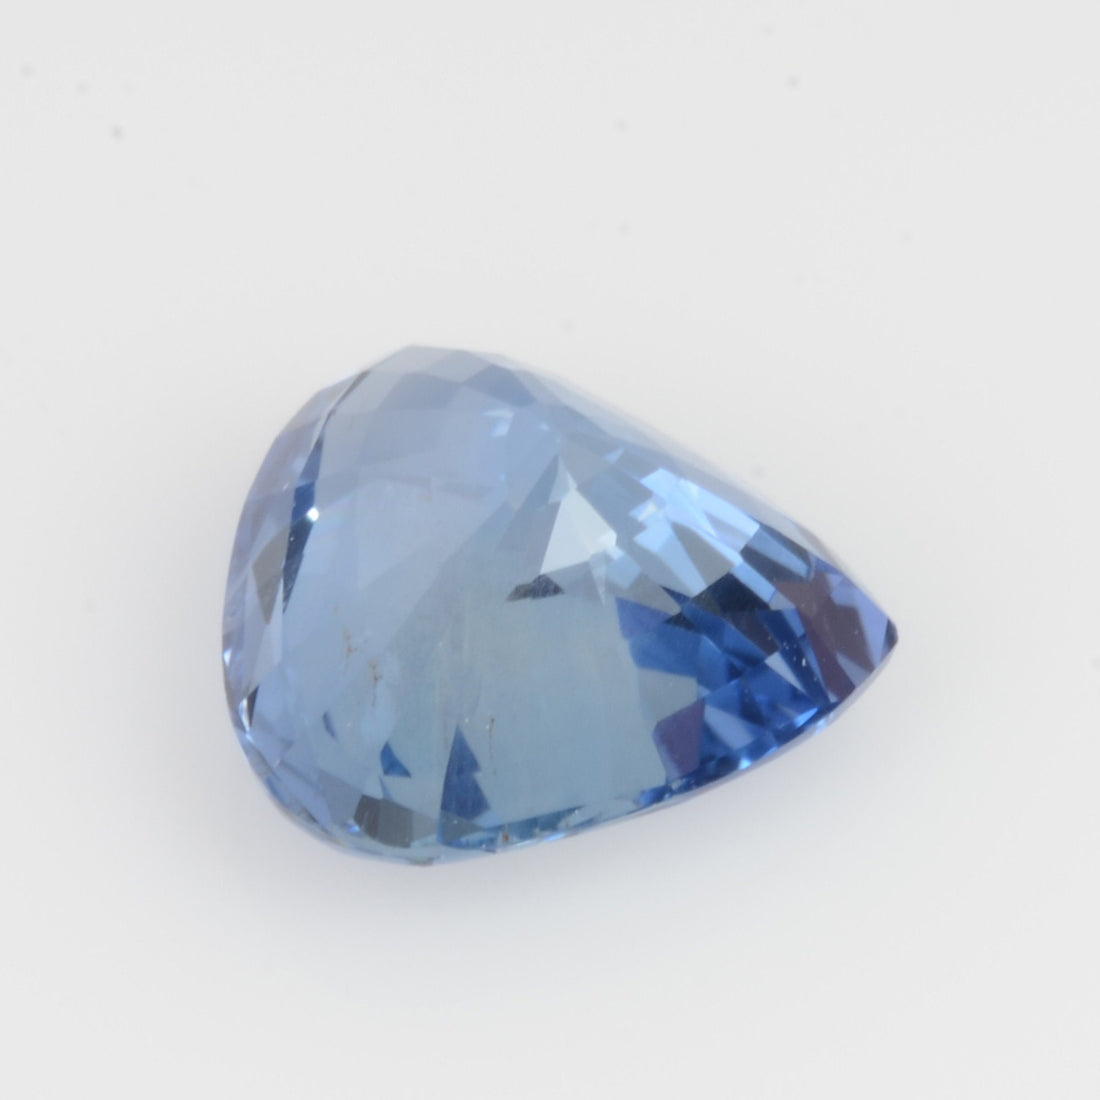 1.69 cts Unheated Natural Blue Sapphire Loose Gemstone Trillion Cut Certified